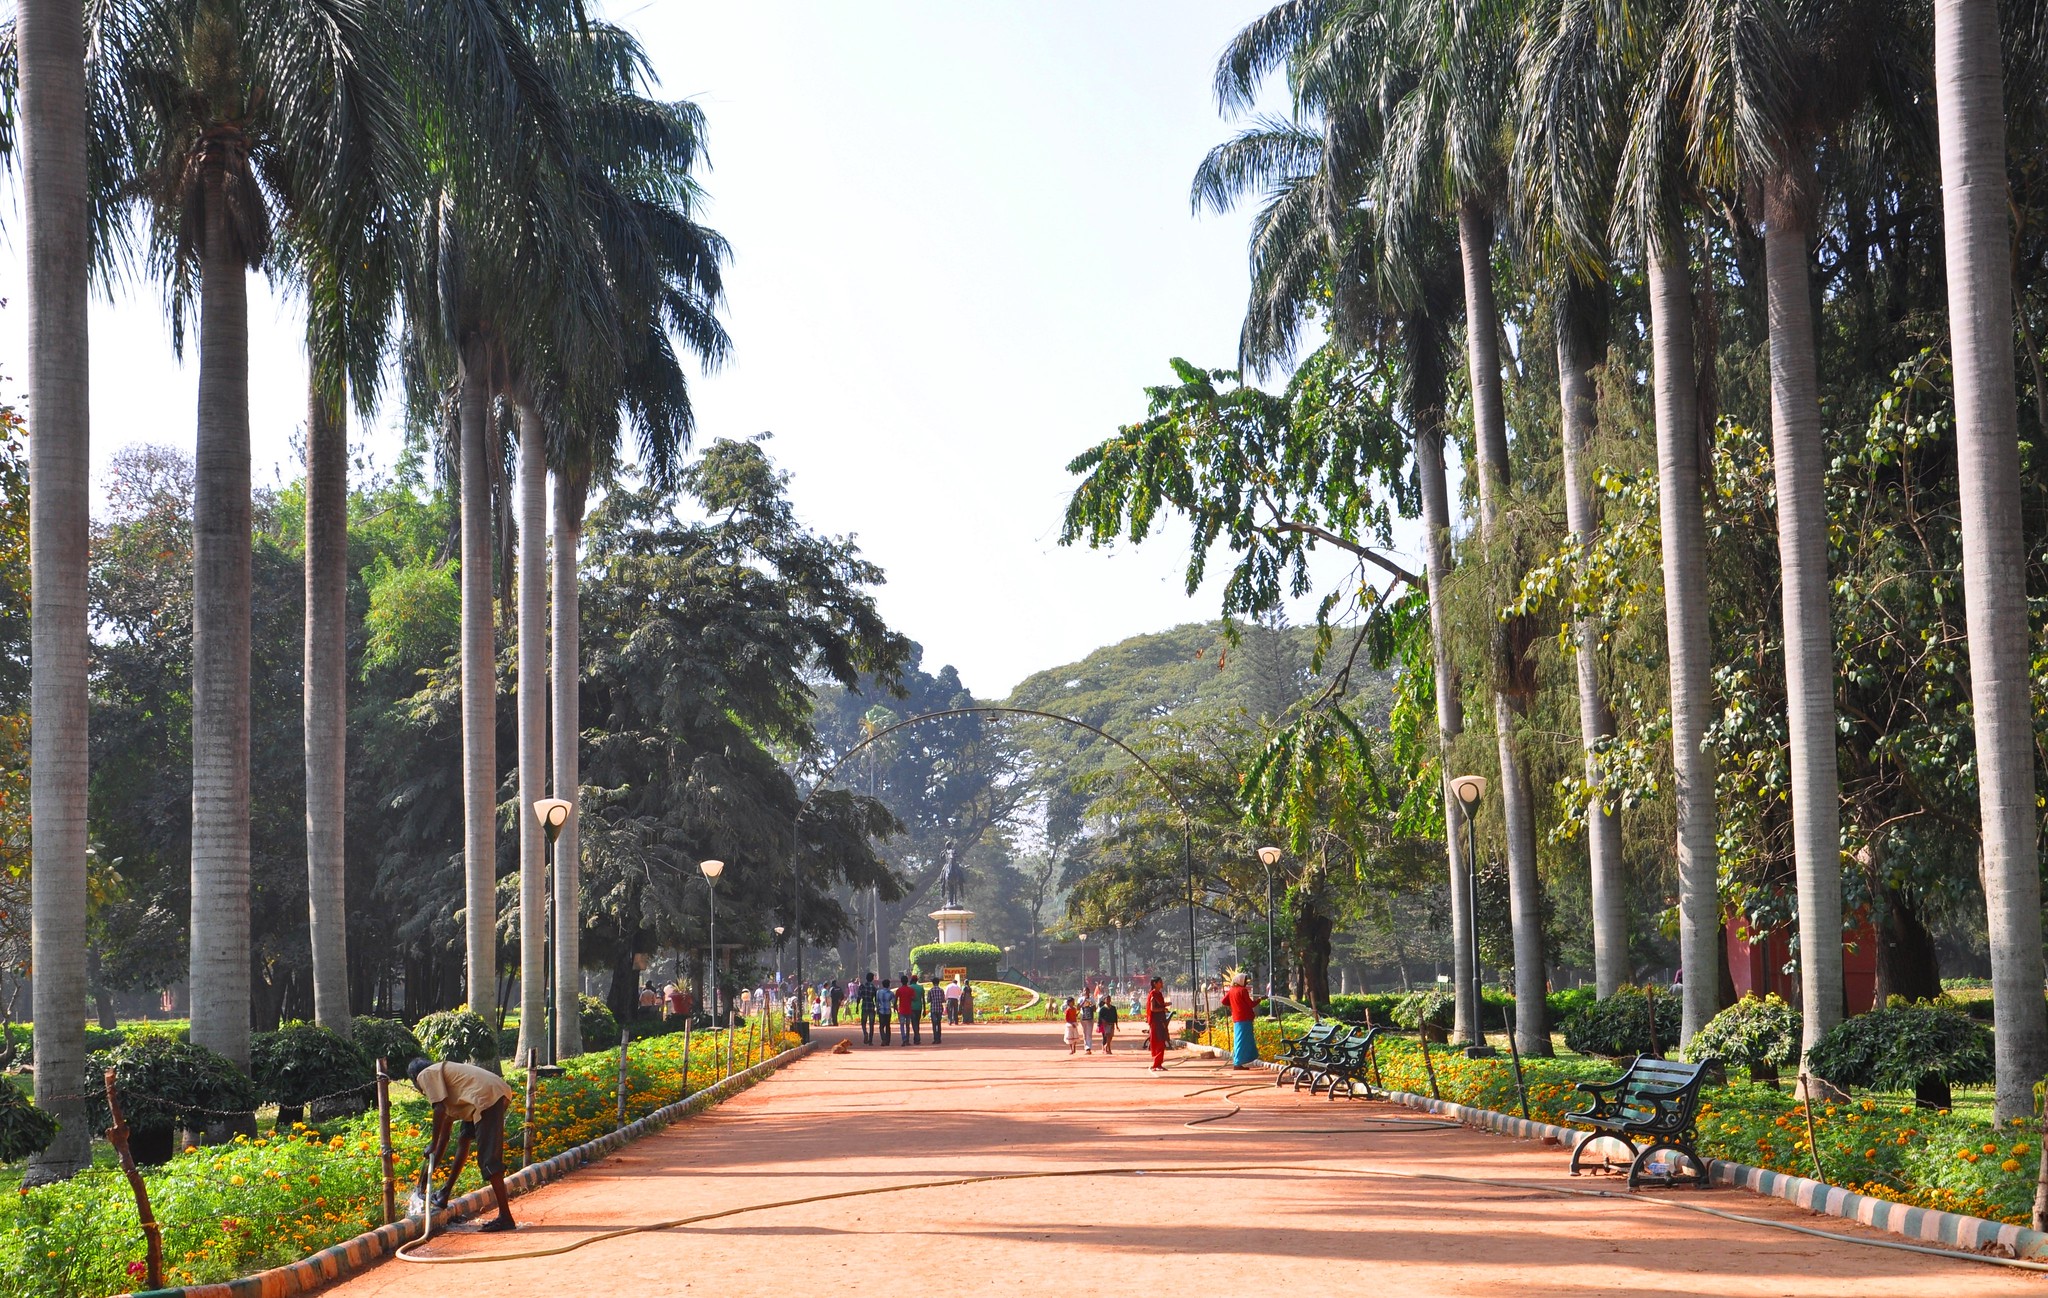 Lalbagh - Krumbiegel's favourite garden was also his home for many years